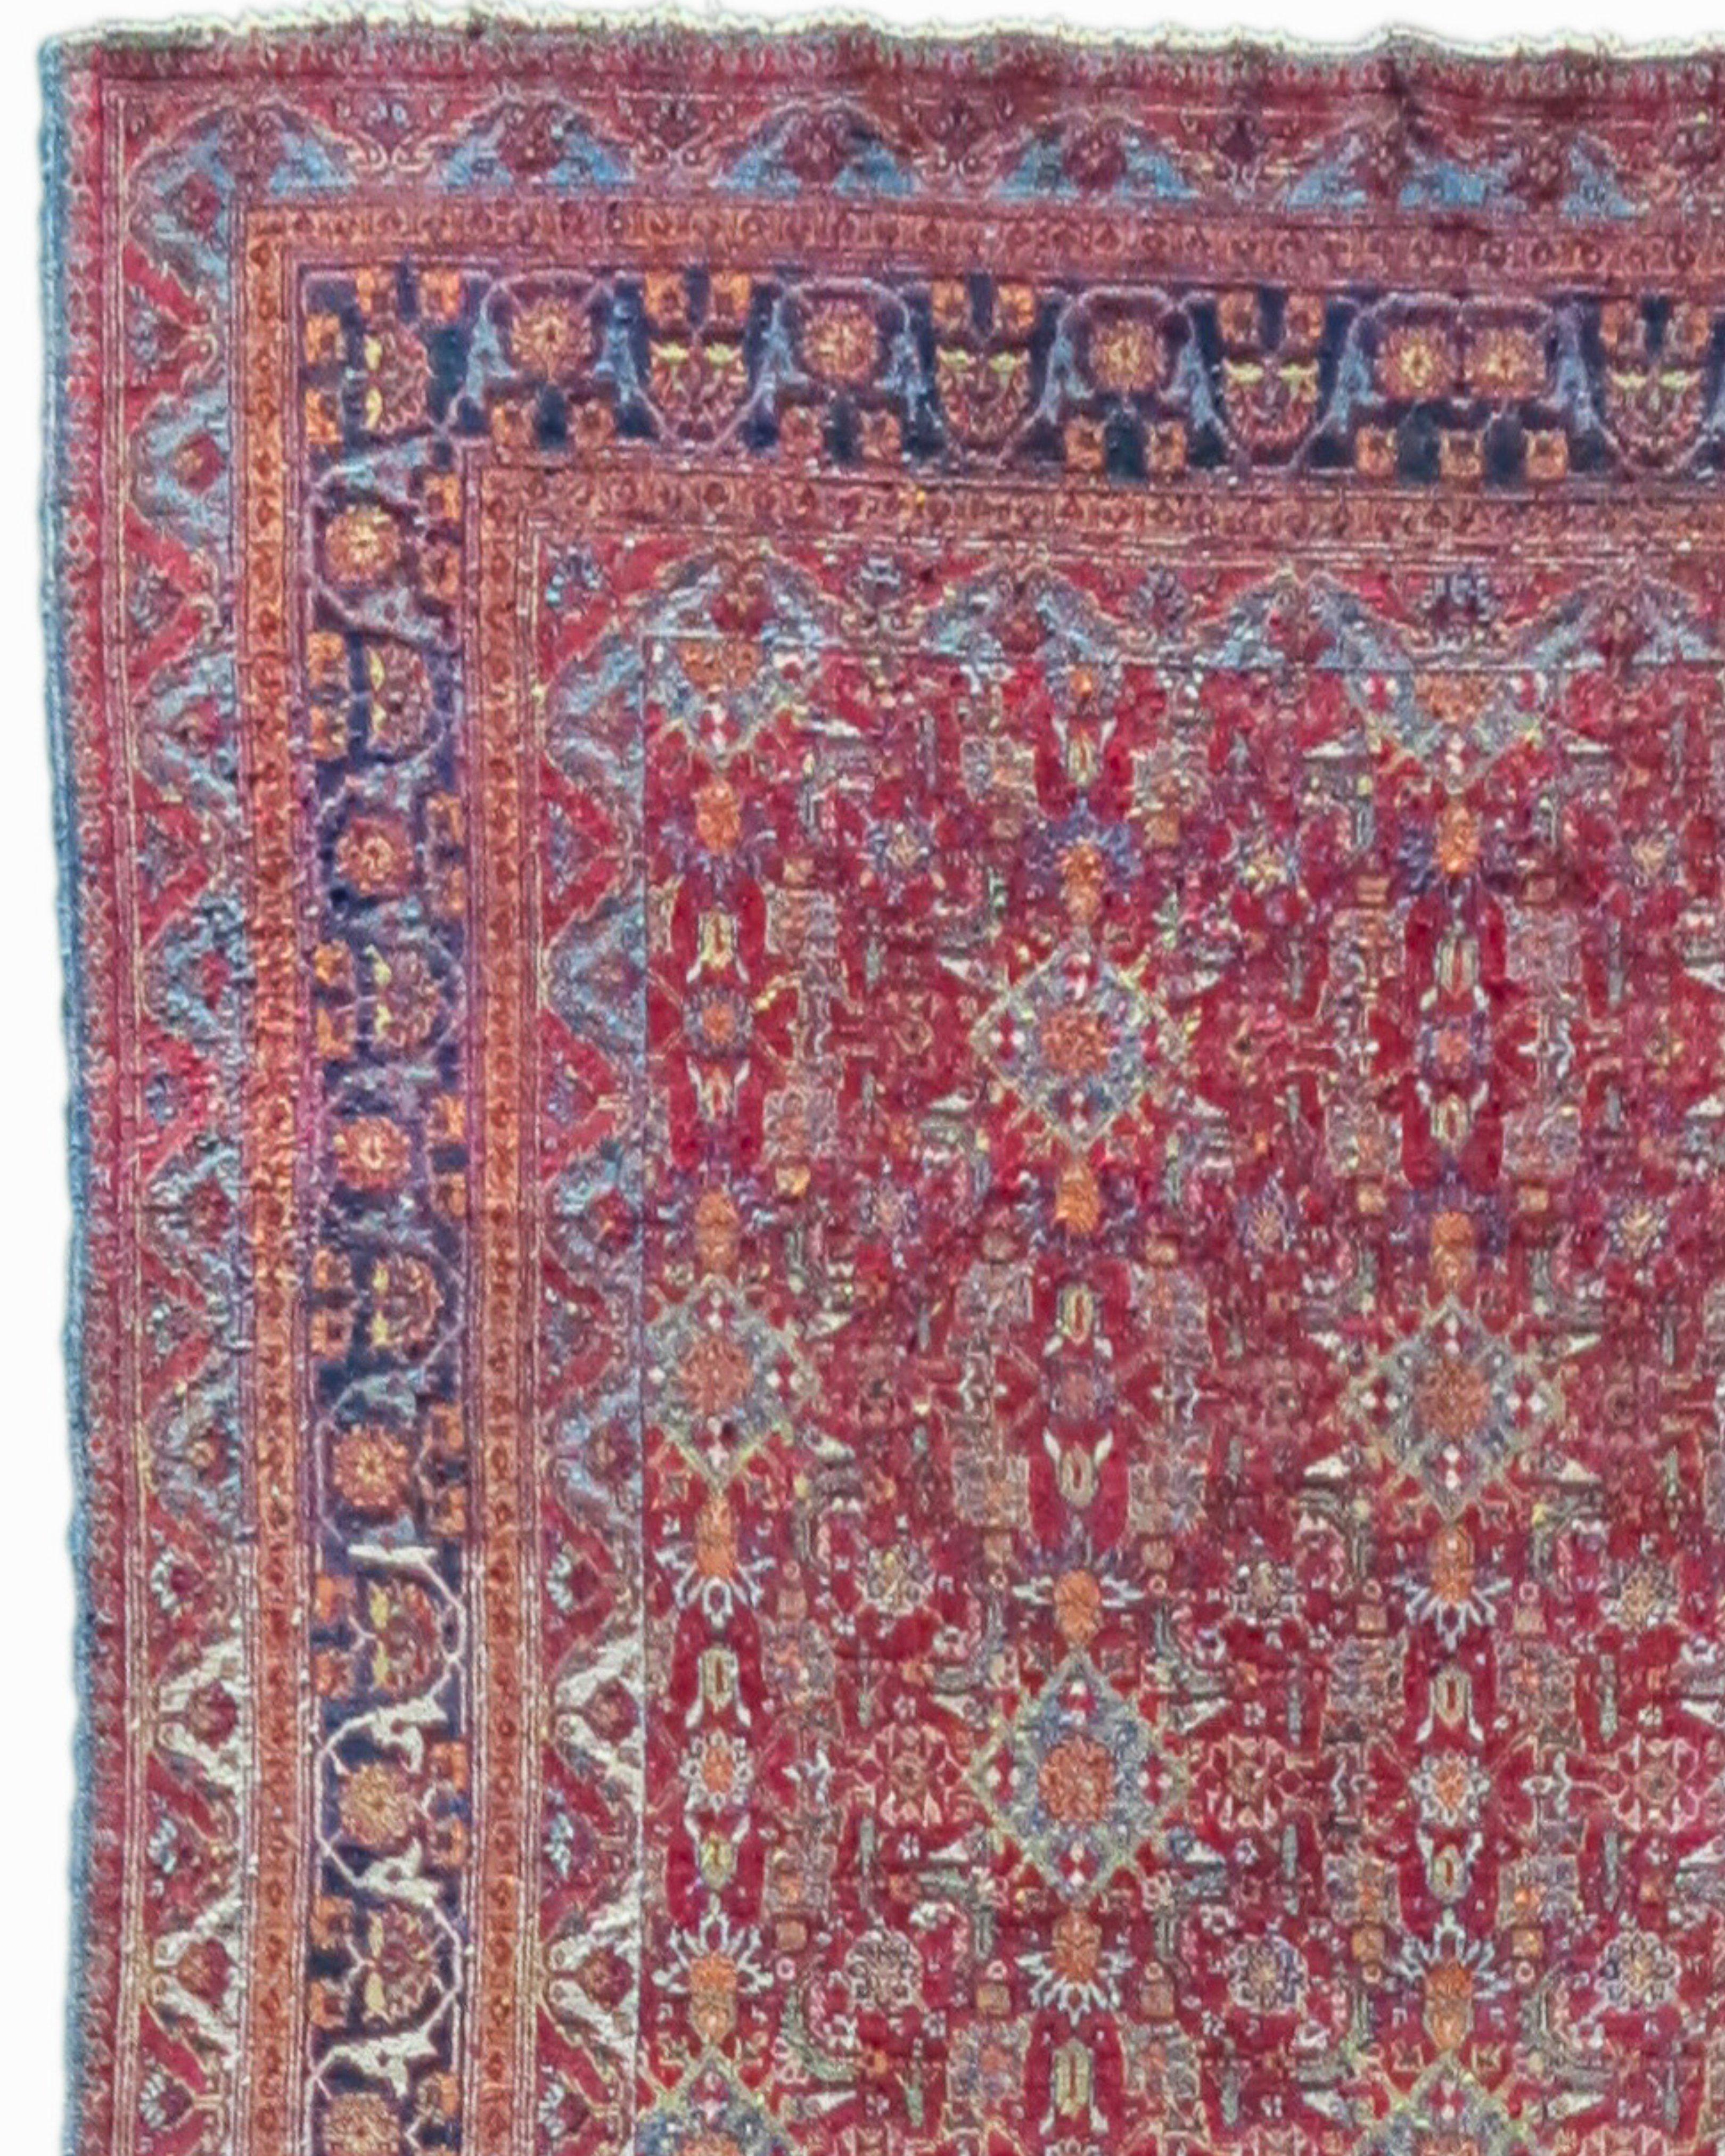 Hand-Knotted Antique Persian Khorassan Carpet, Late 19th Century For Sale